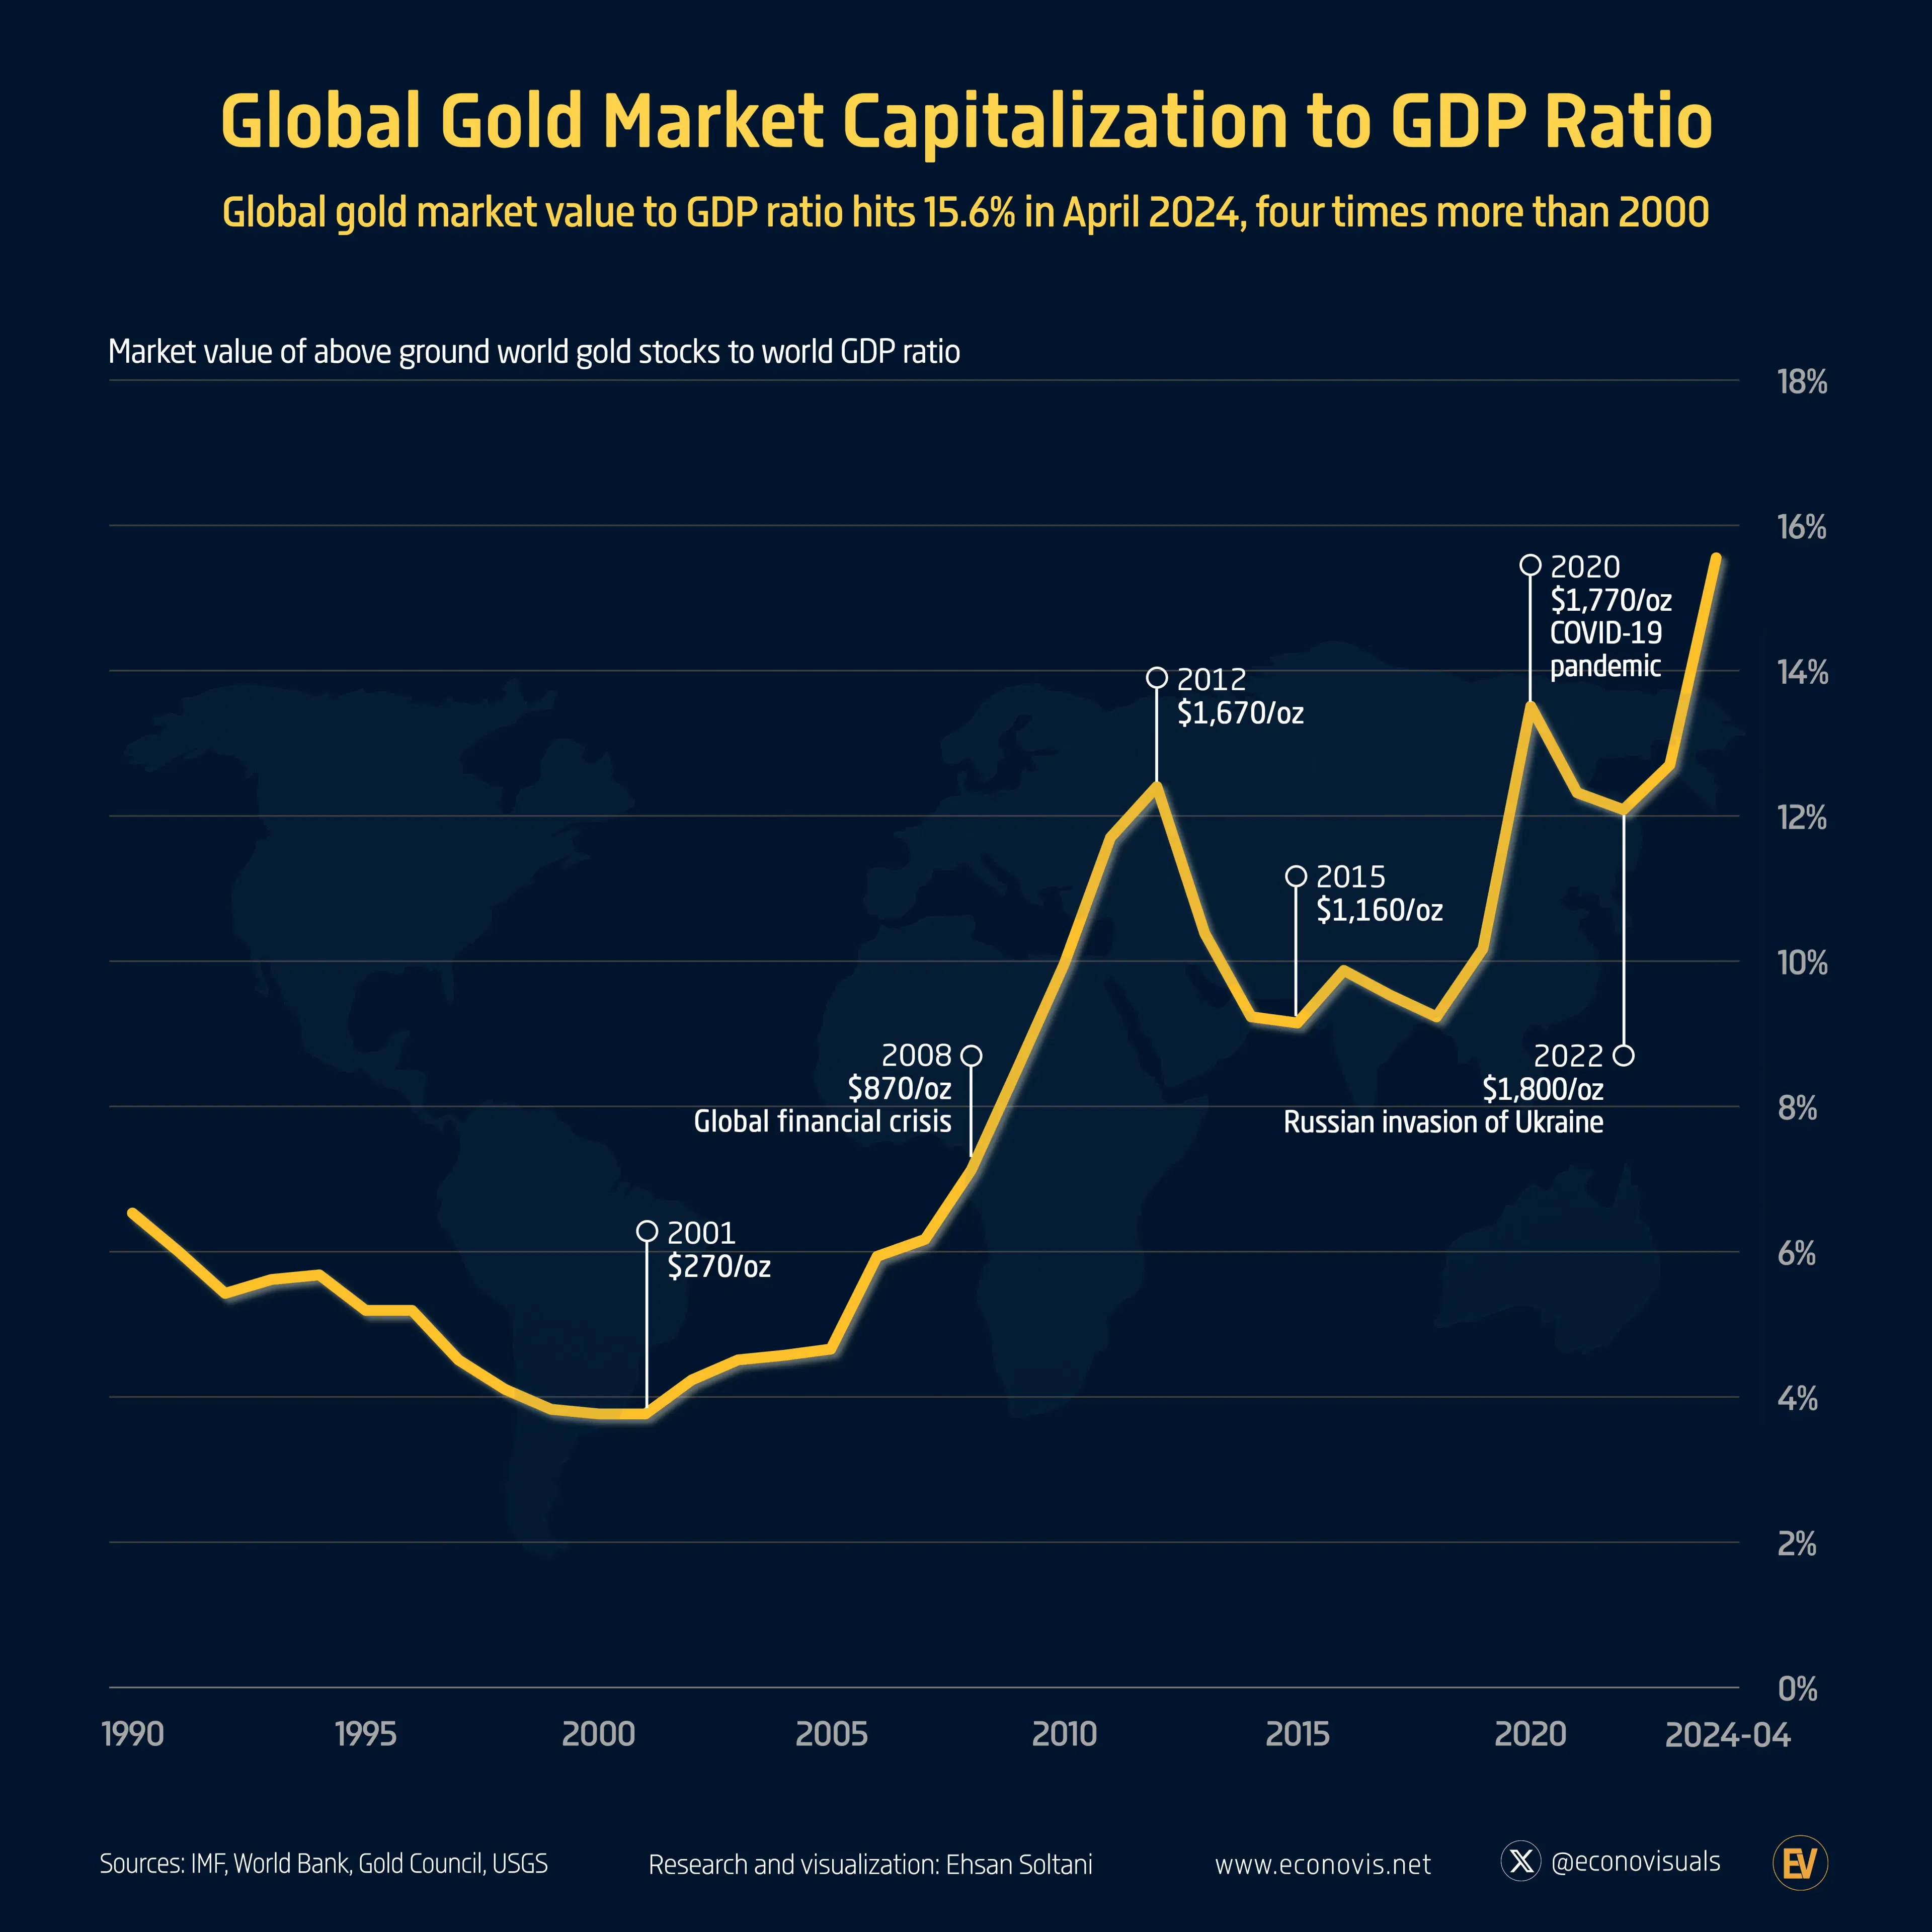 Global Gold Market Capitalization to GDP Ratio